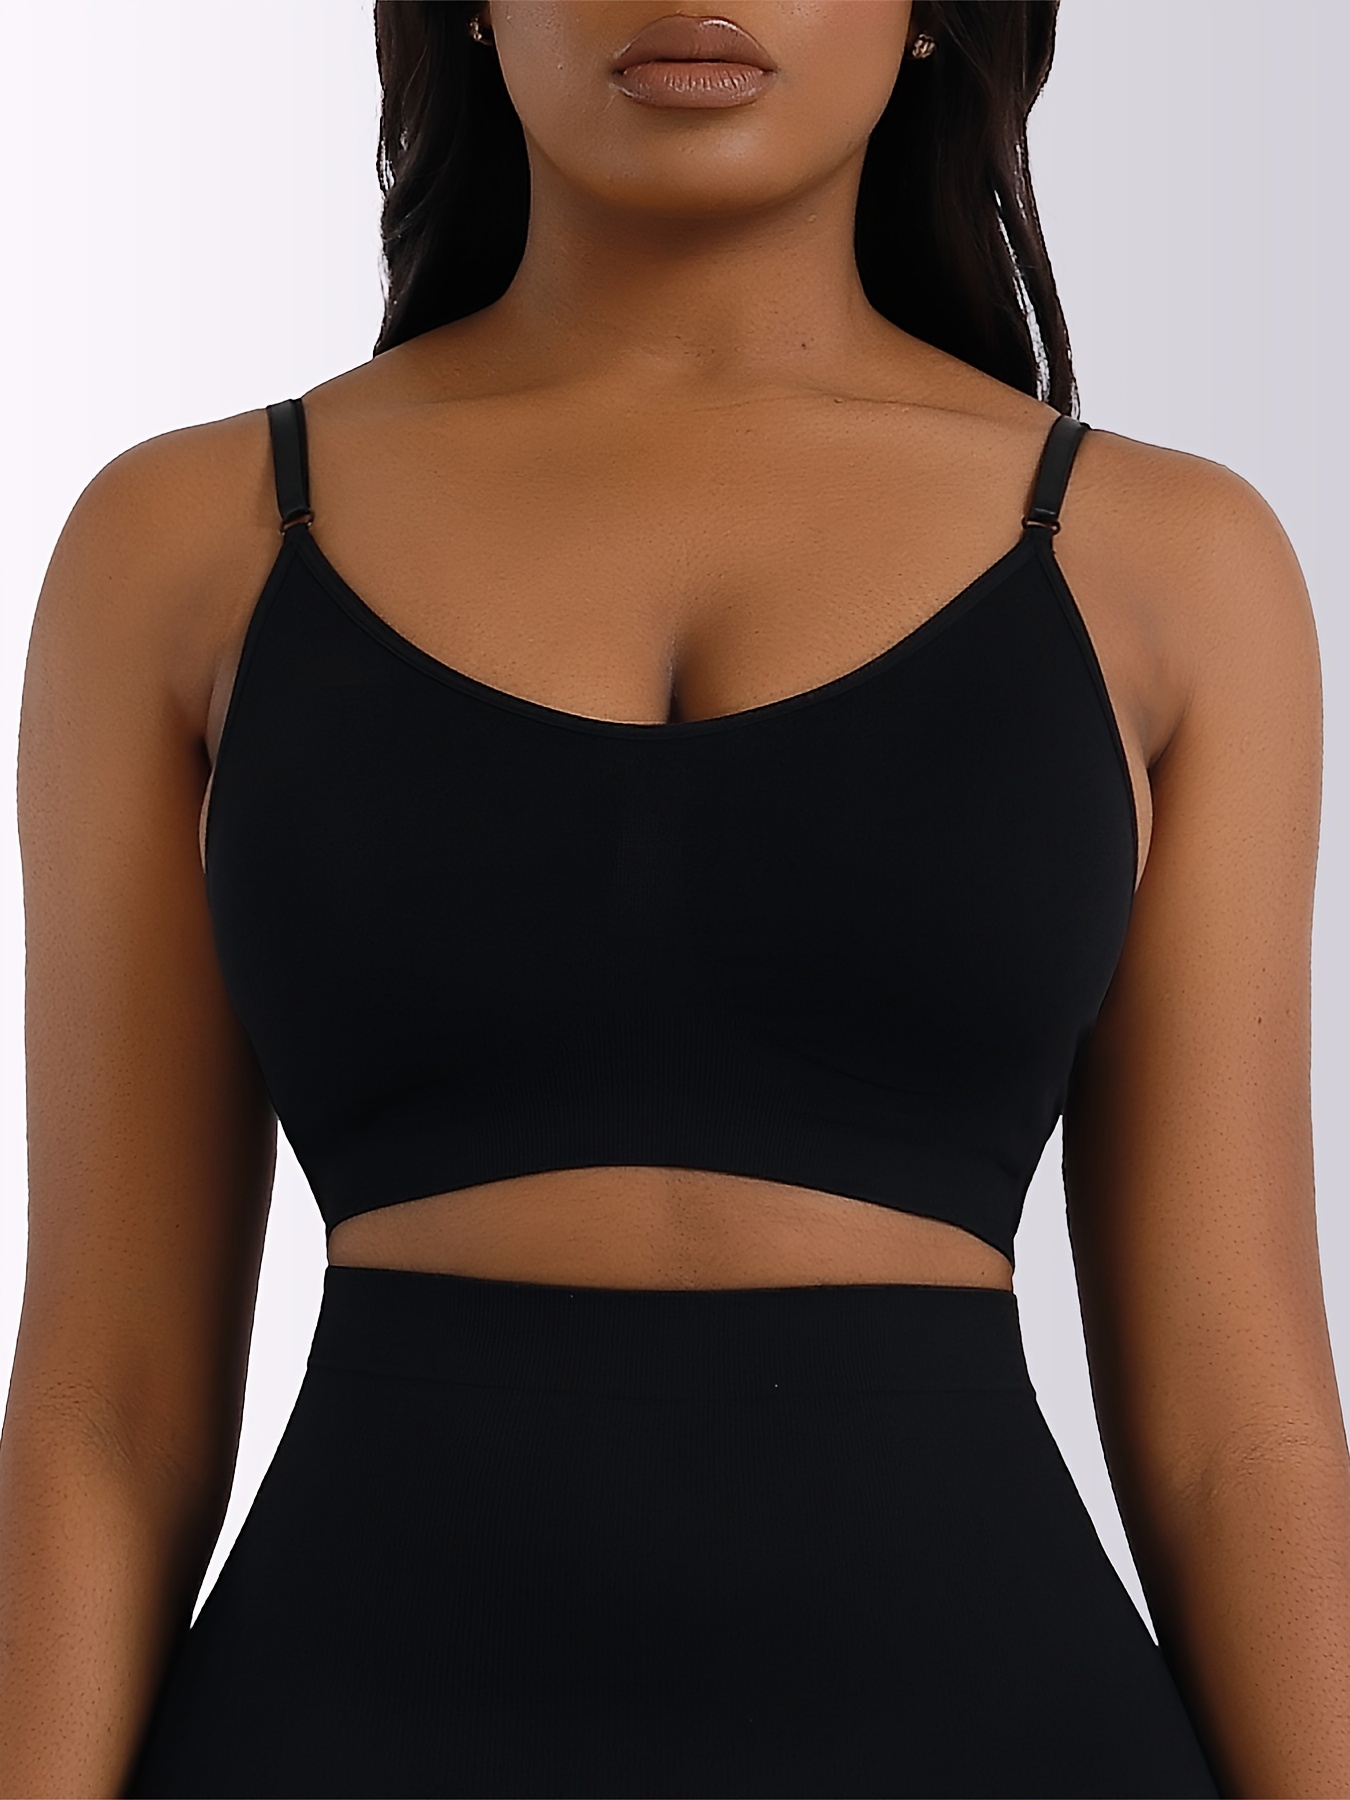 VEREM Underoutfit Bras for Women Traceless Thin One-piece Fixed